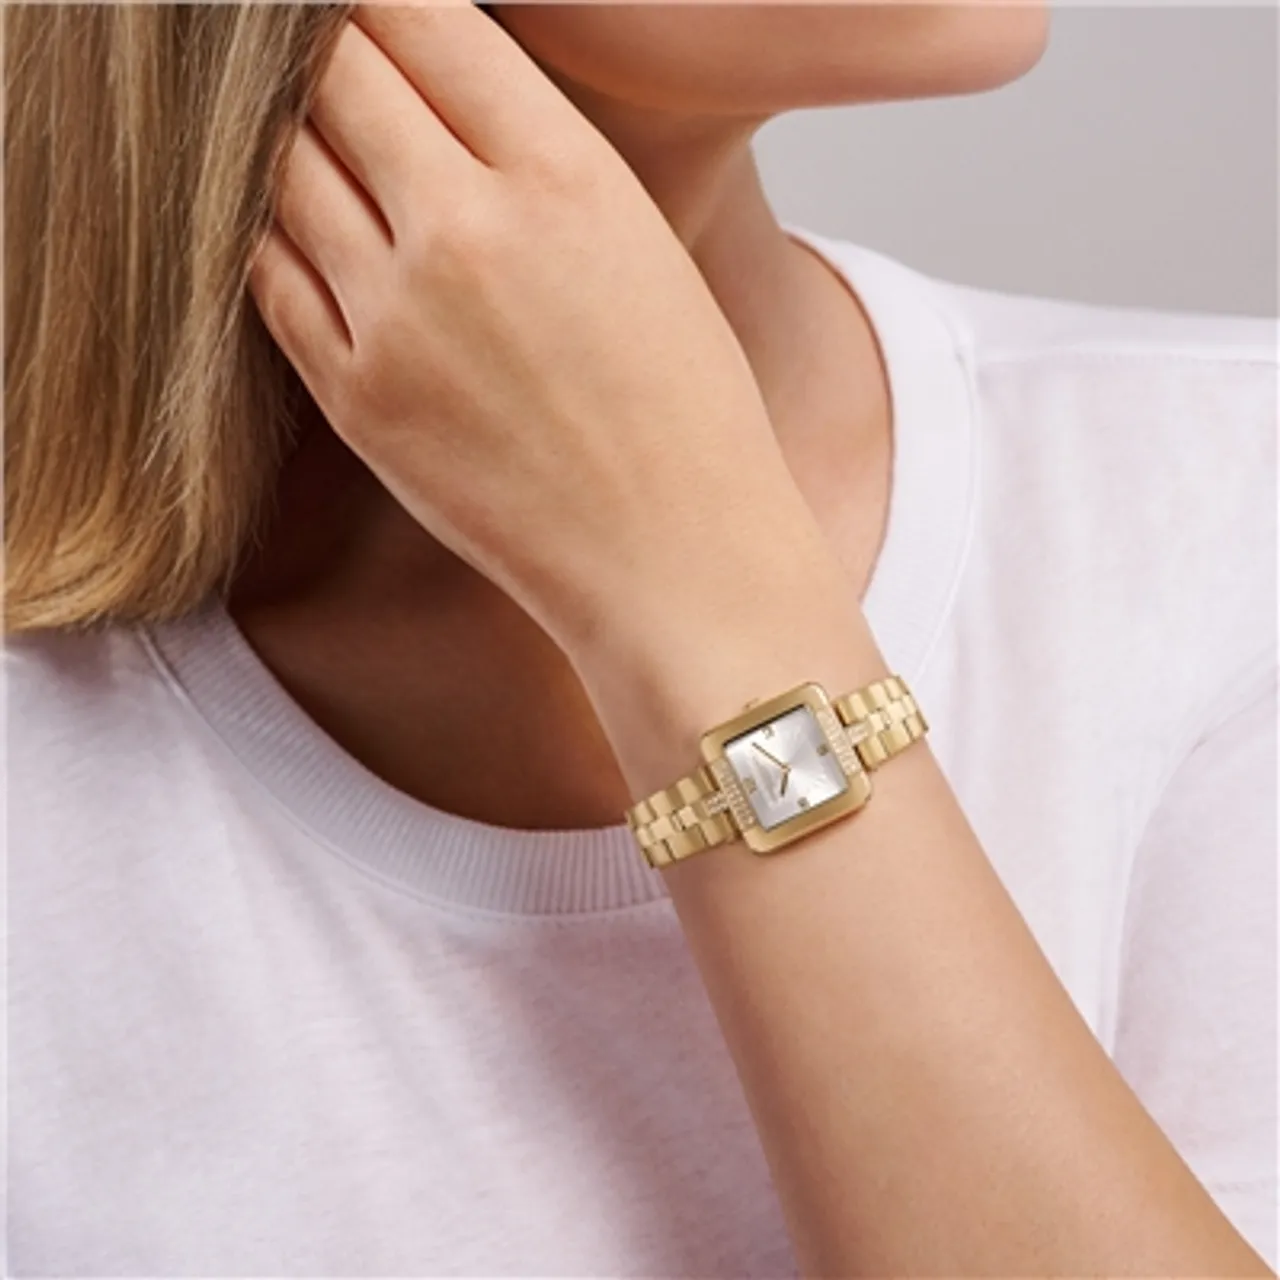 Ted Baker Recycled Gold Crystal Square Bracelet Watch - Gold